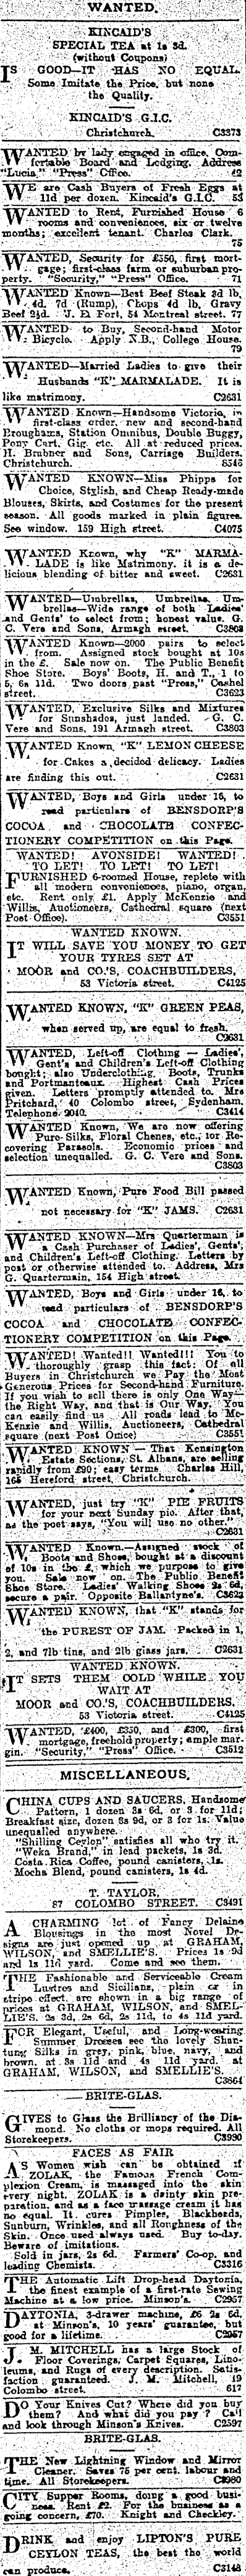 Papers Past Newspapers Press 2 October 1908 Page 10 Advertisements Column 3